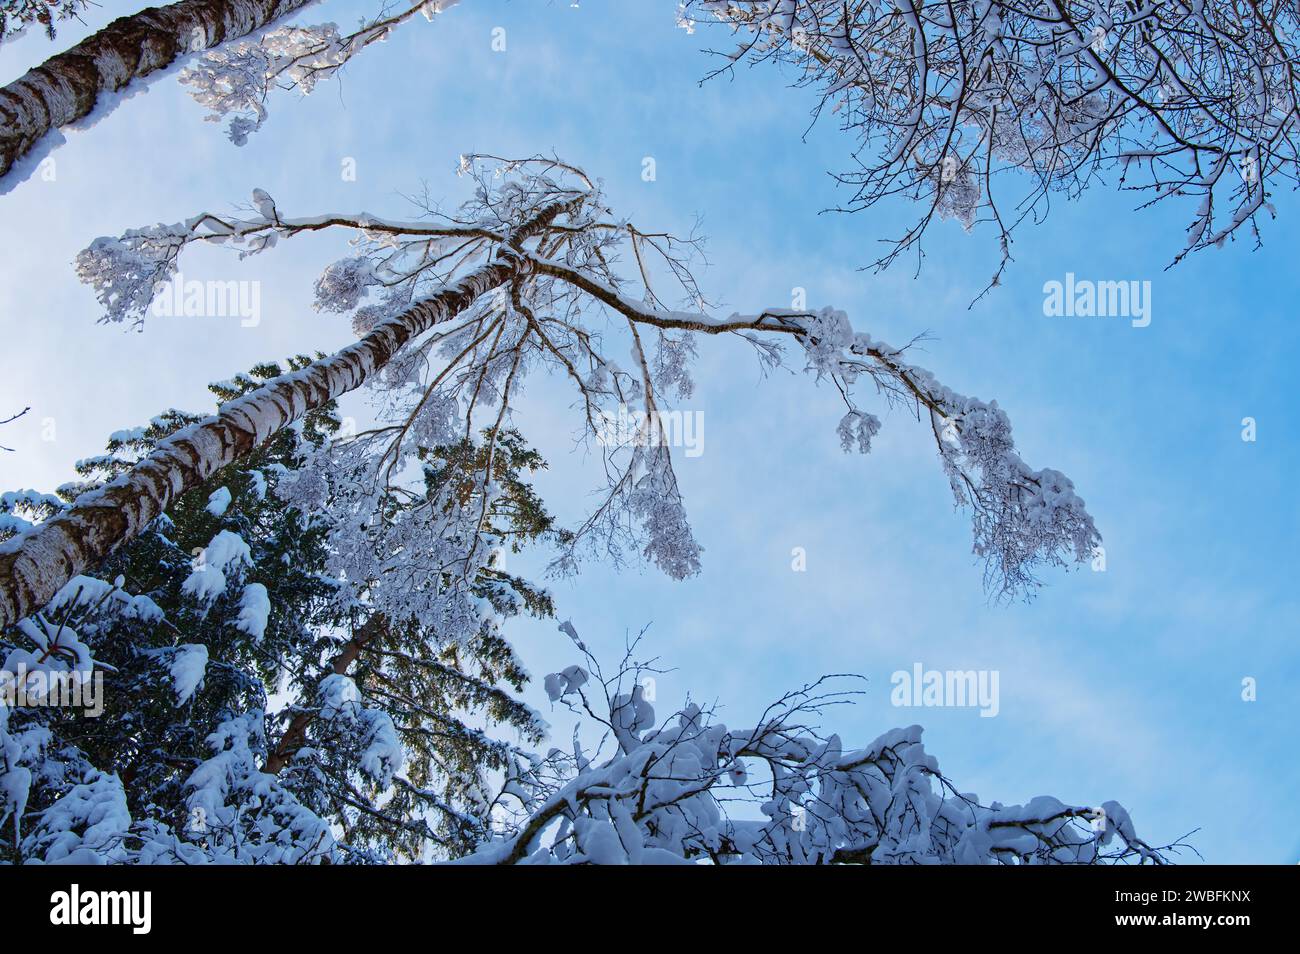 View from underneath of a tree covered in snow in a winter landscape Stock Photo